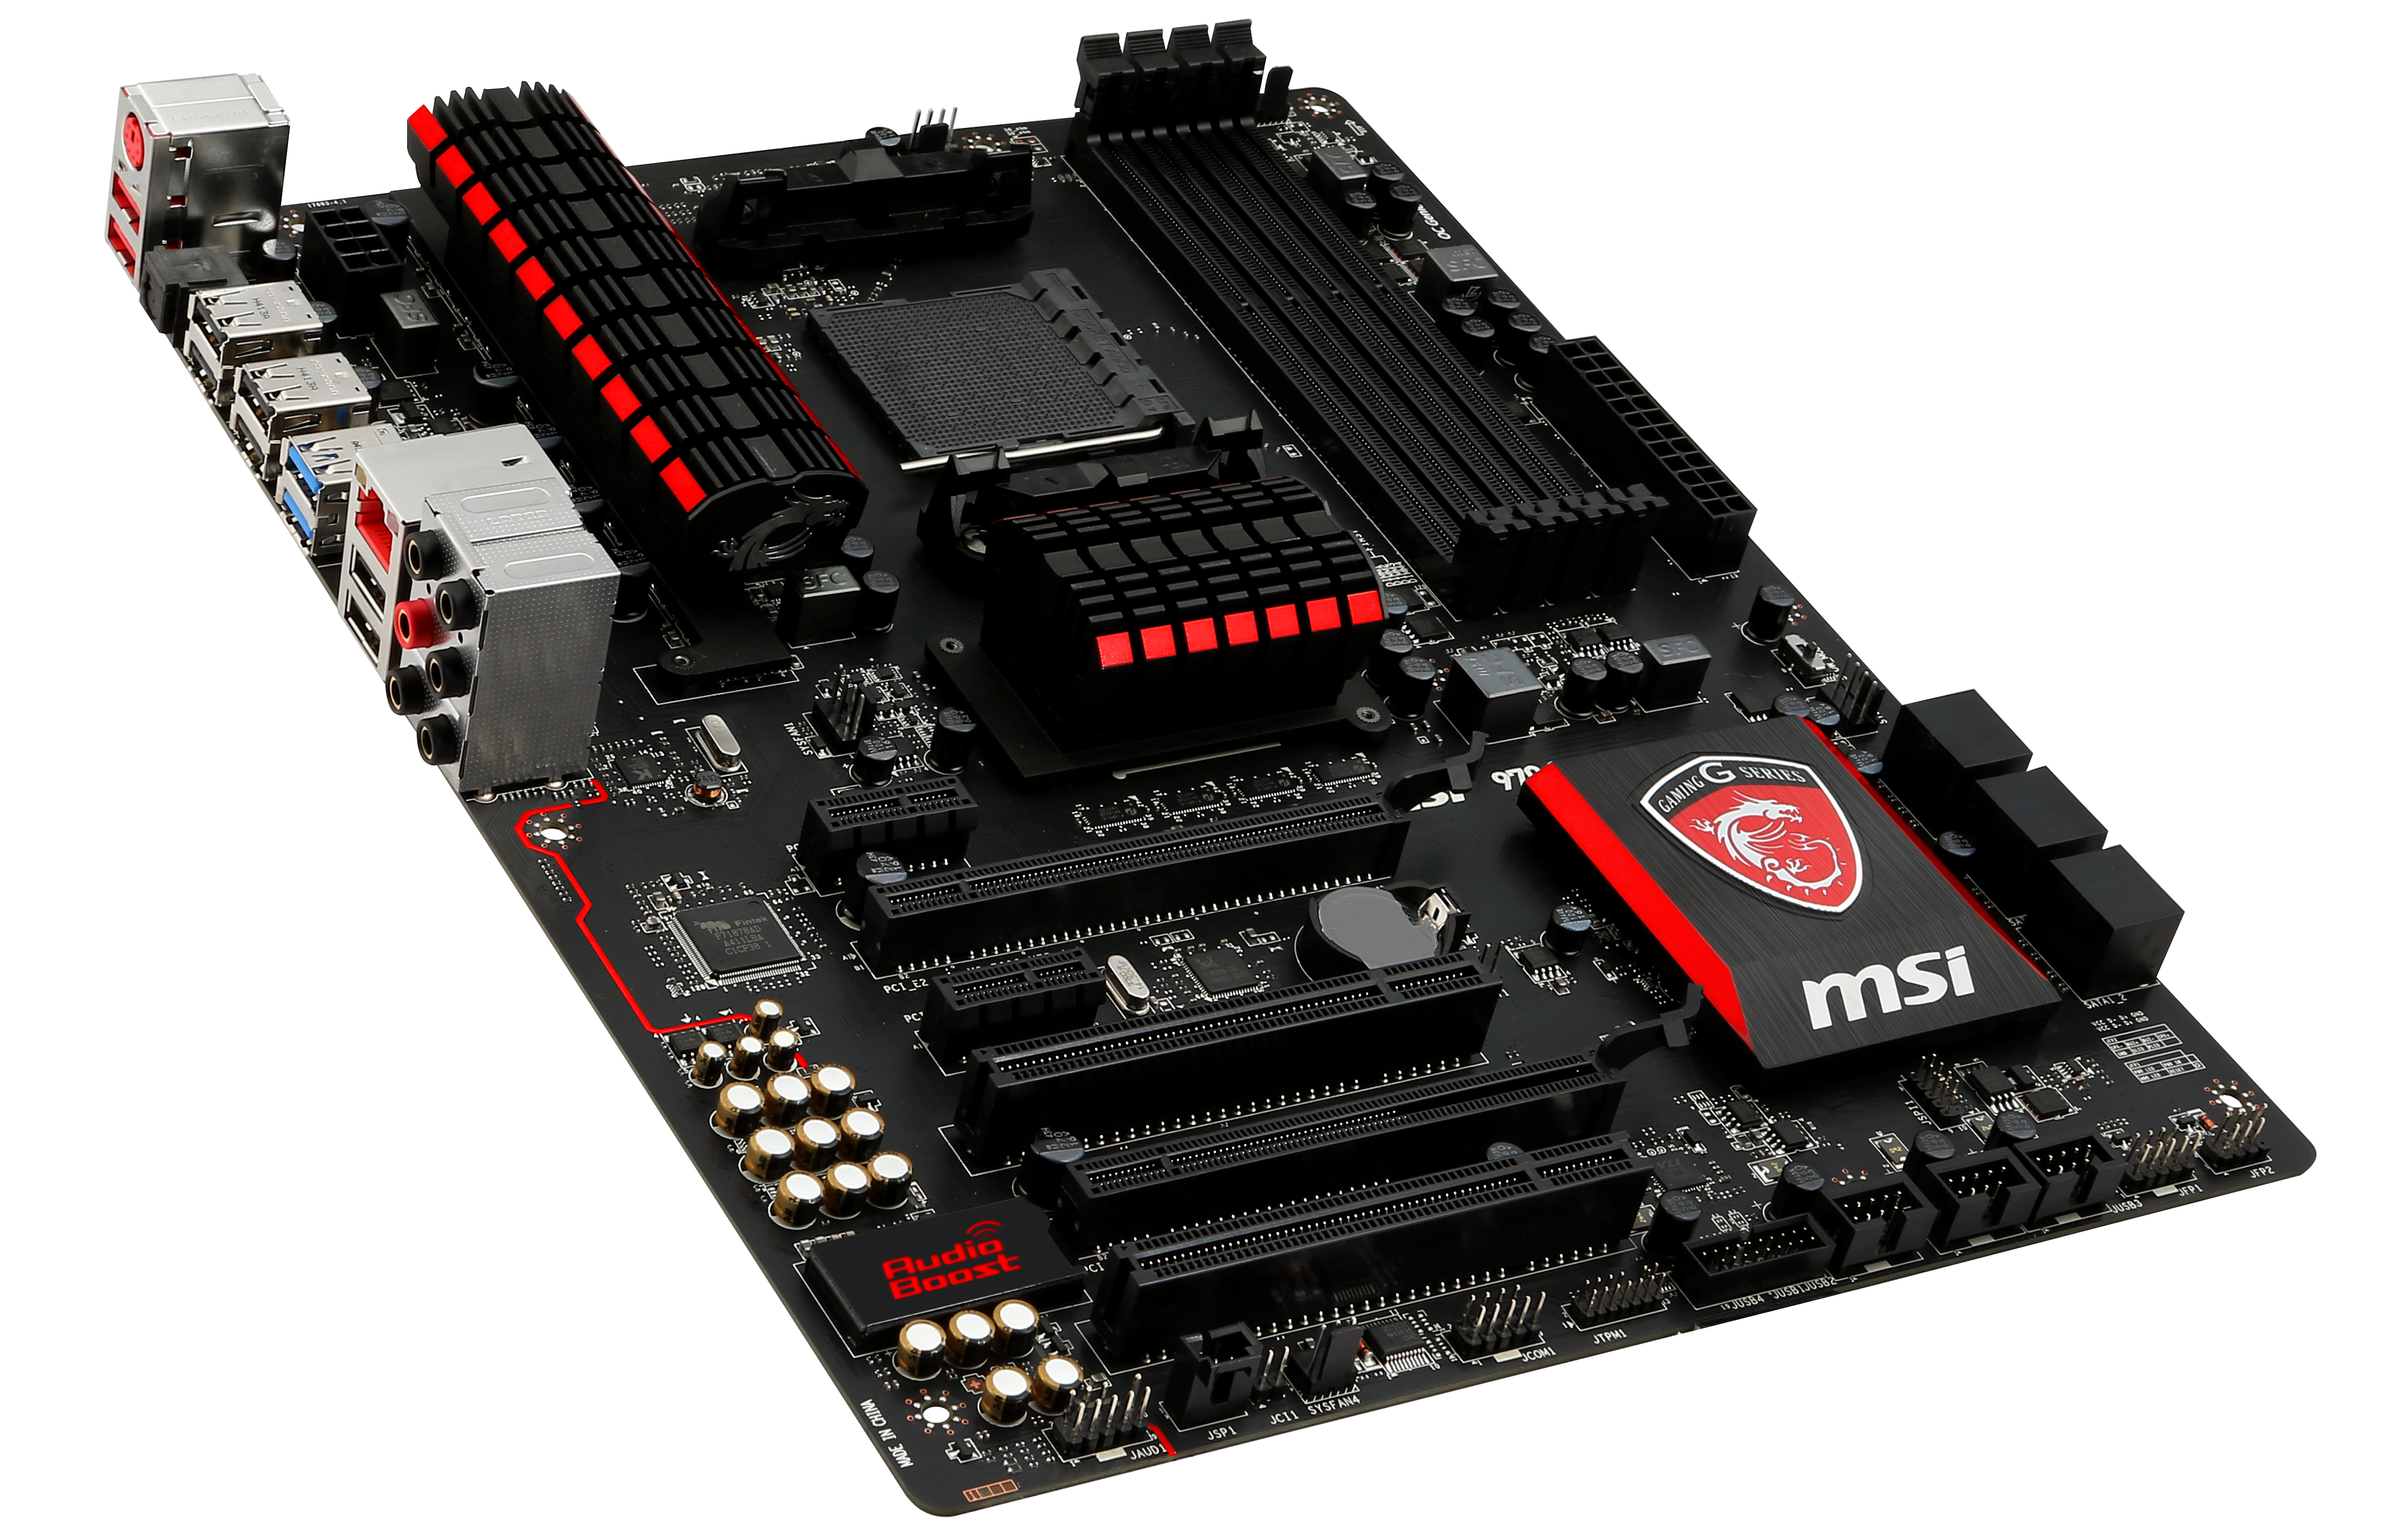 MSI 970 Gaming Motherboard Review: Undercutting AM3+ at $100